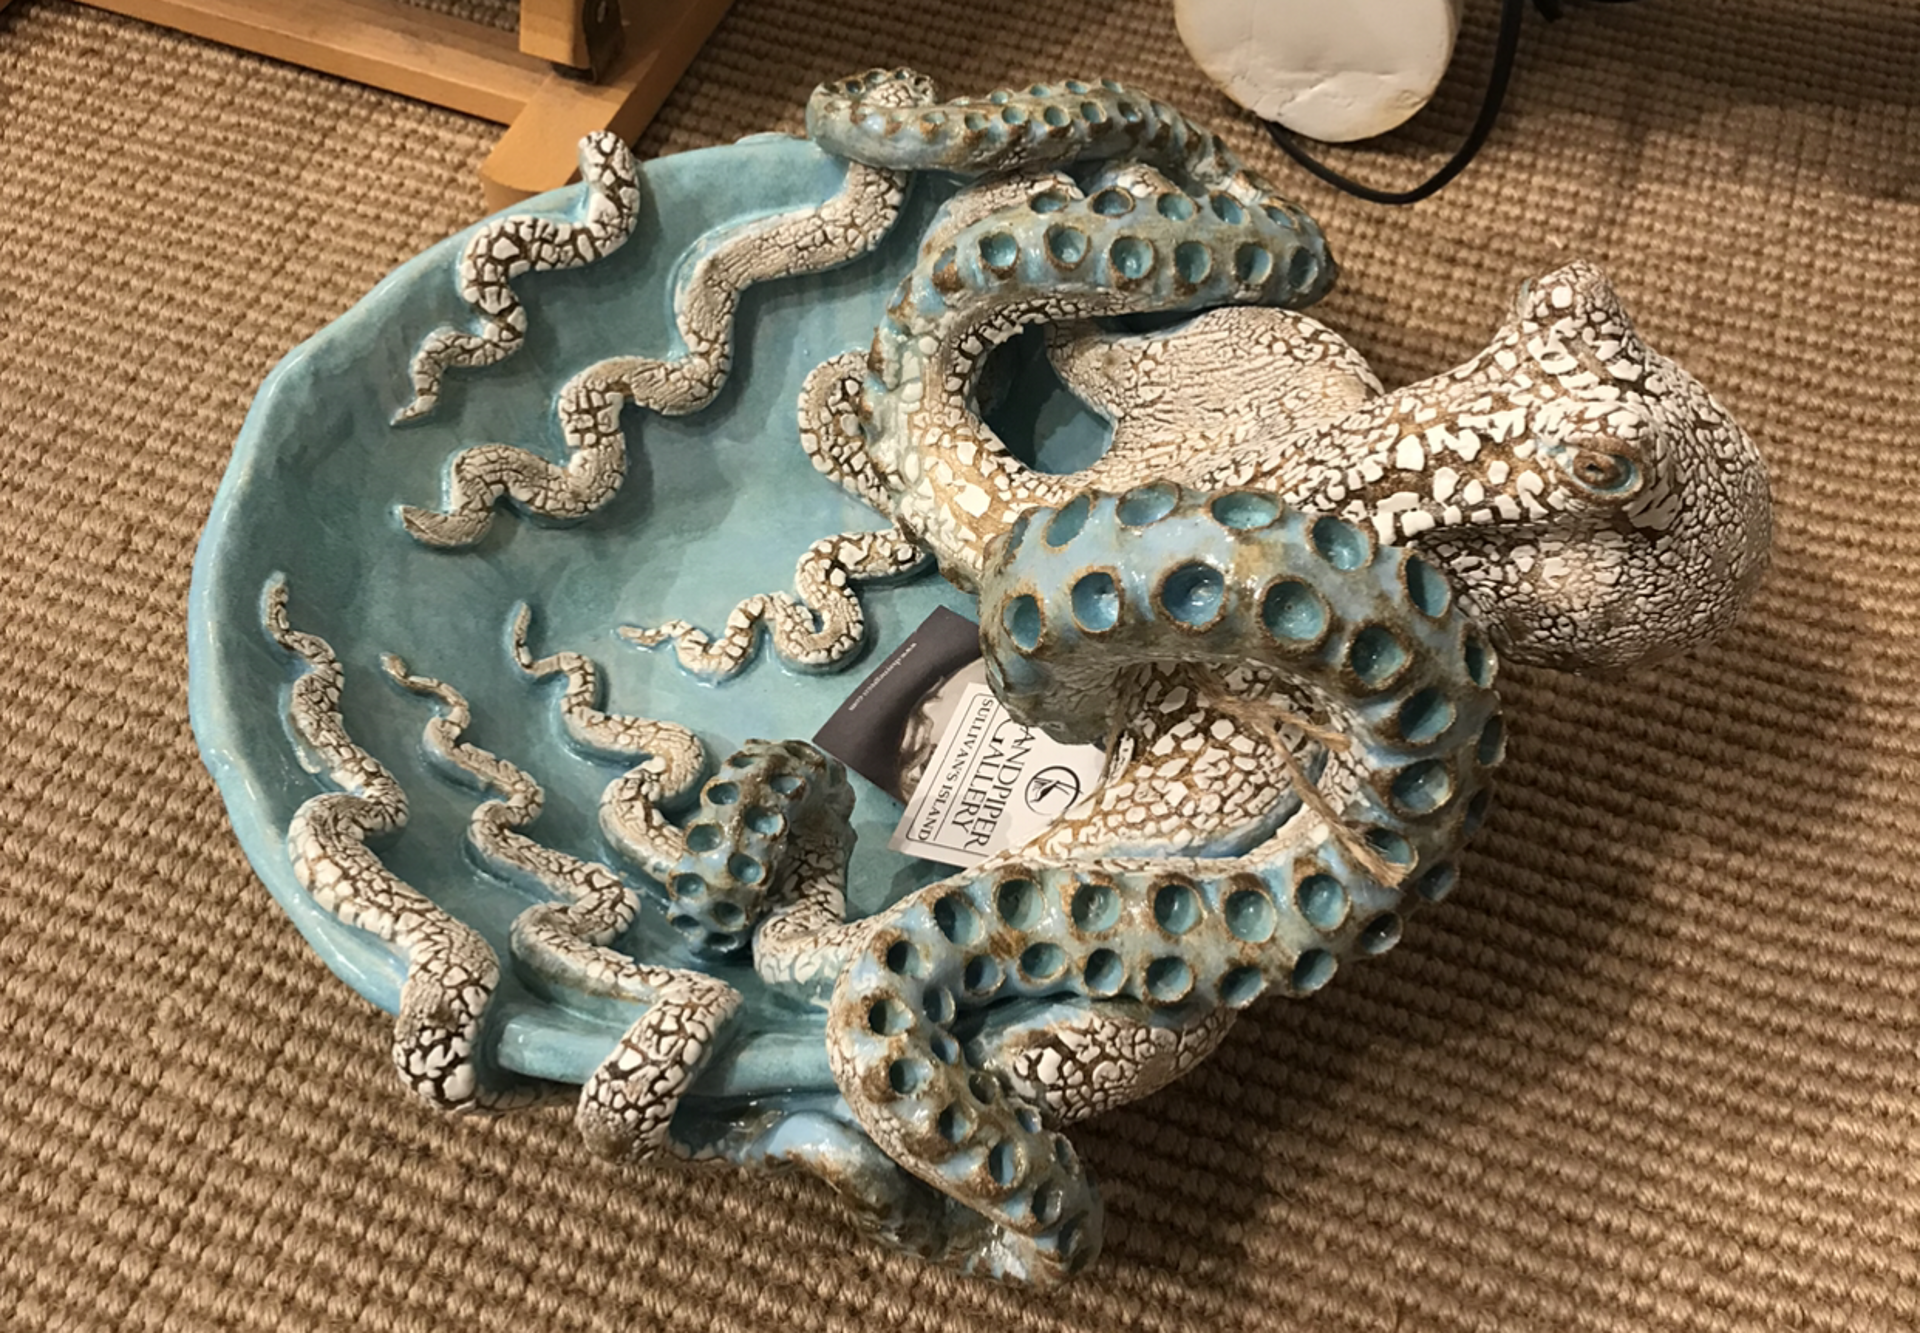 SG22-80 Large Octopus Bowl (Caribbean Blue) by Shayne Greco